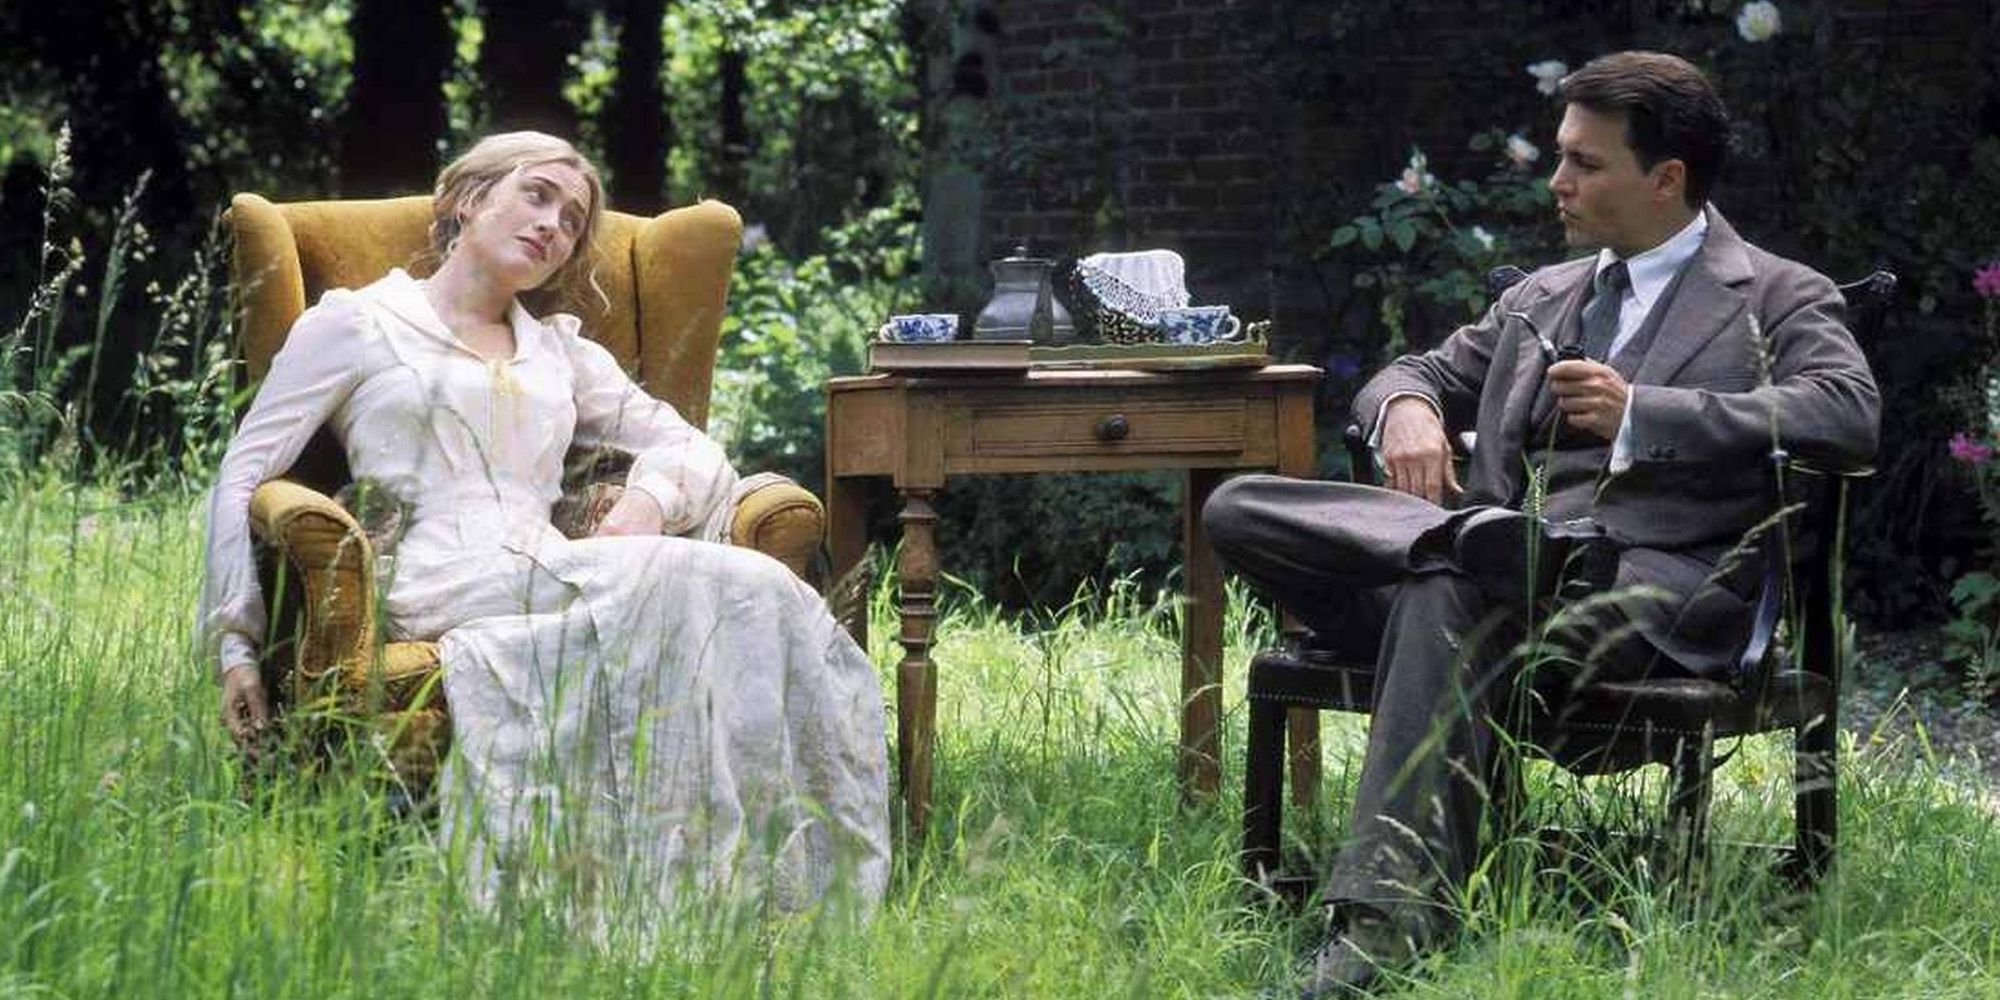 Johnny depp and Kate Winslet in Finding Neverland